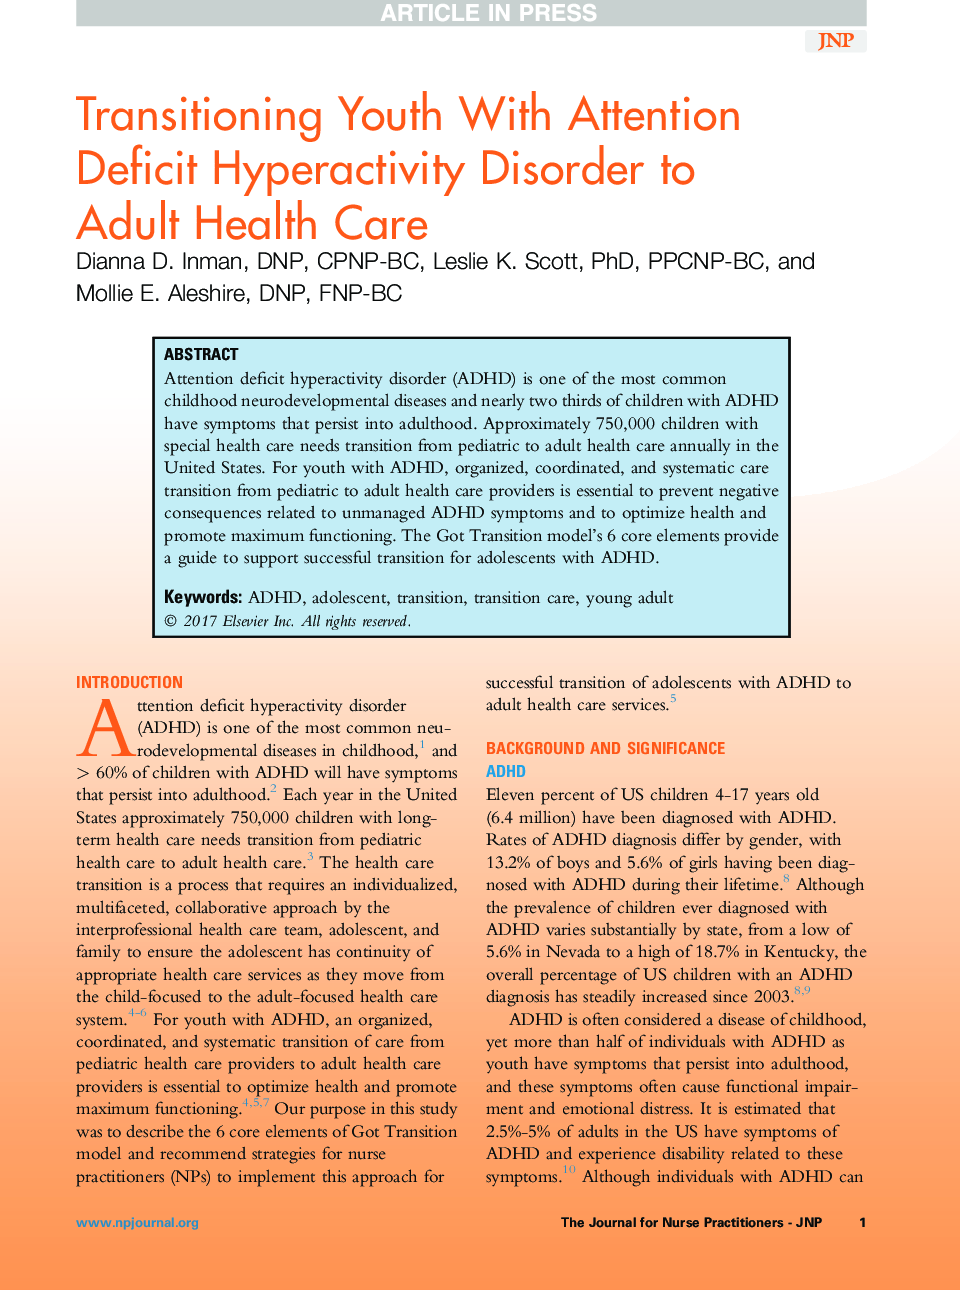 Transitioning Youth With Attention Deficit Hyperactivity Disorder to Adult Health Care